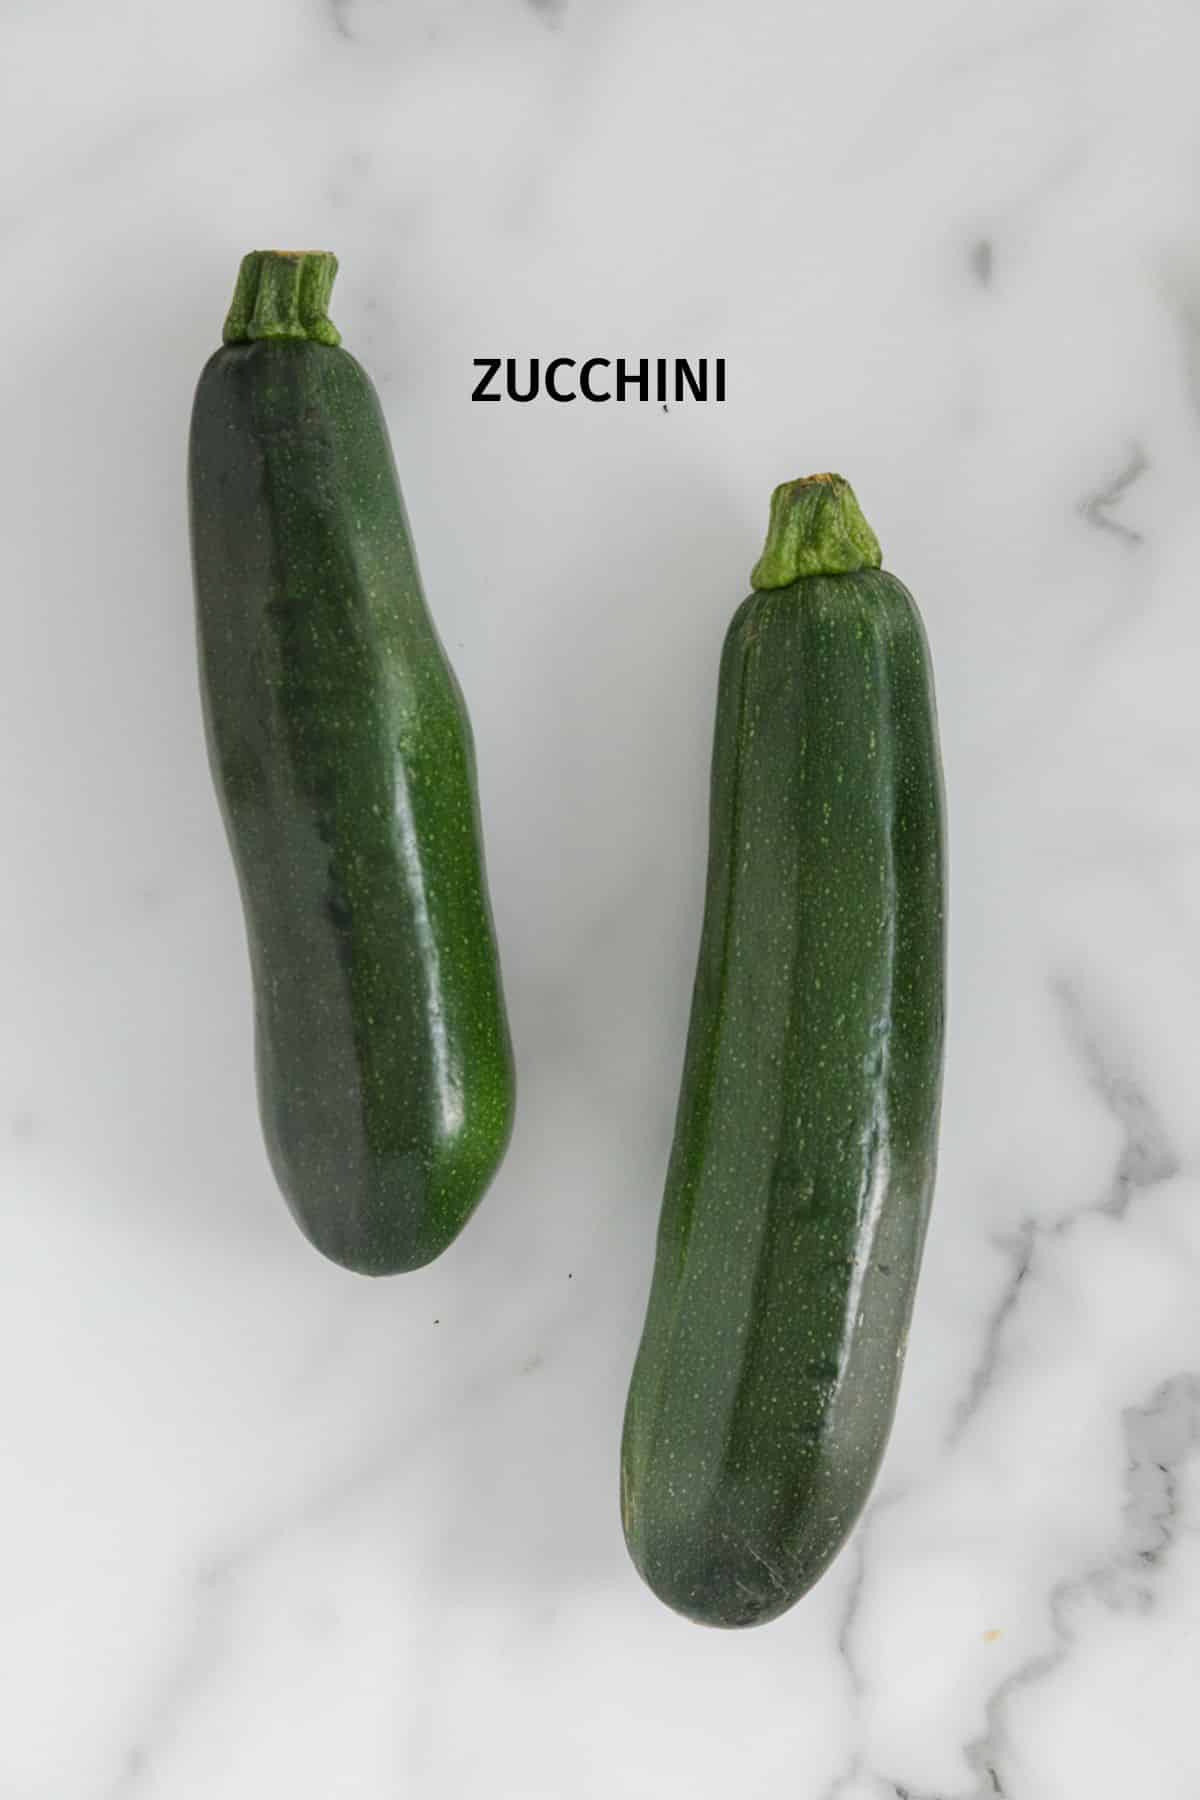 Two whole zucchini on a white marble surface.